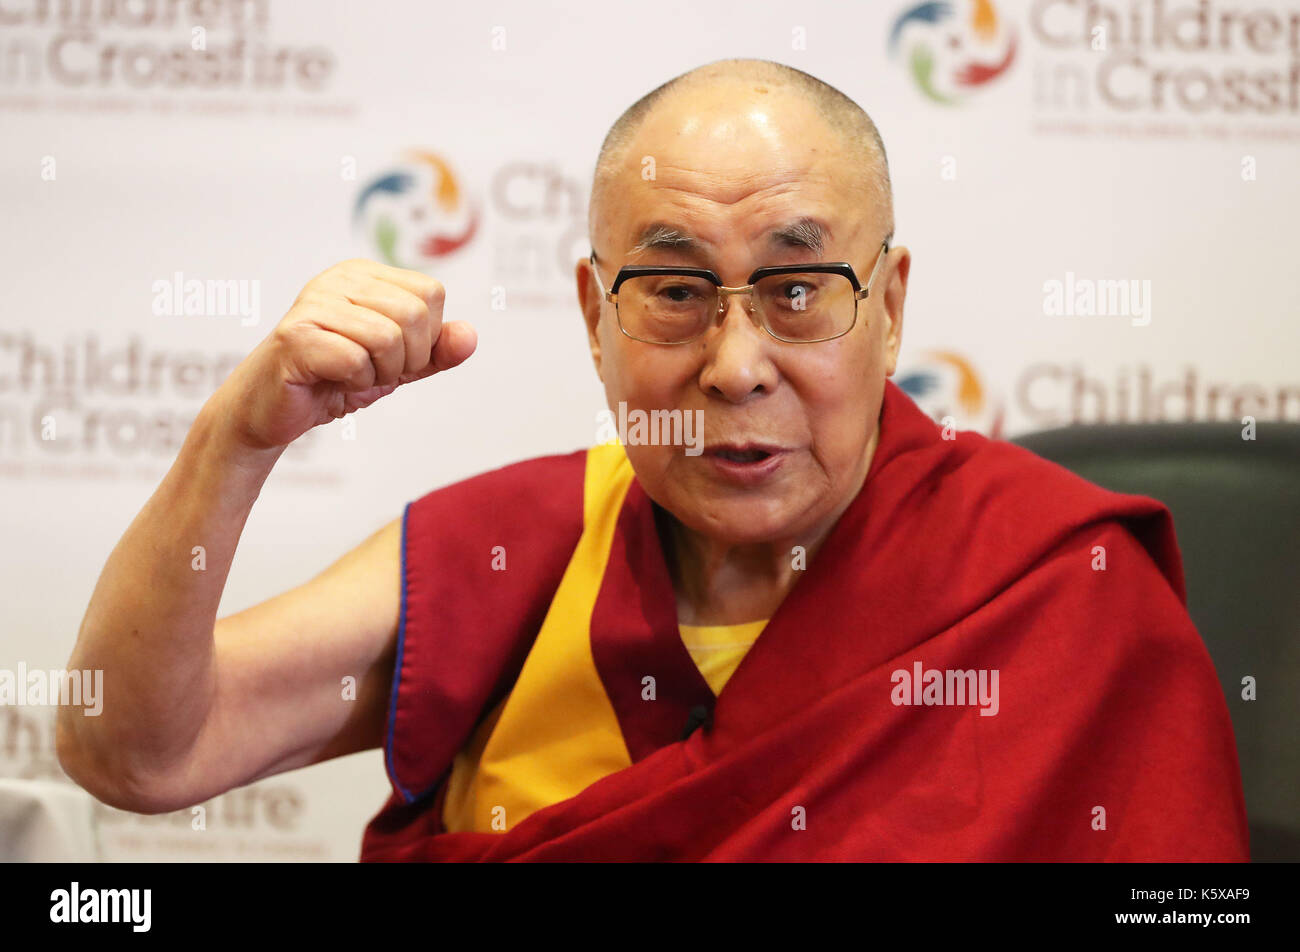 The Dalai Lama speaking at the City Hotel in Londonderry Stock Photo - Alamy